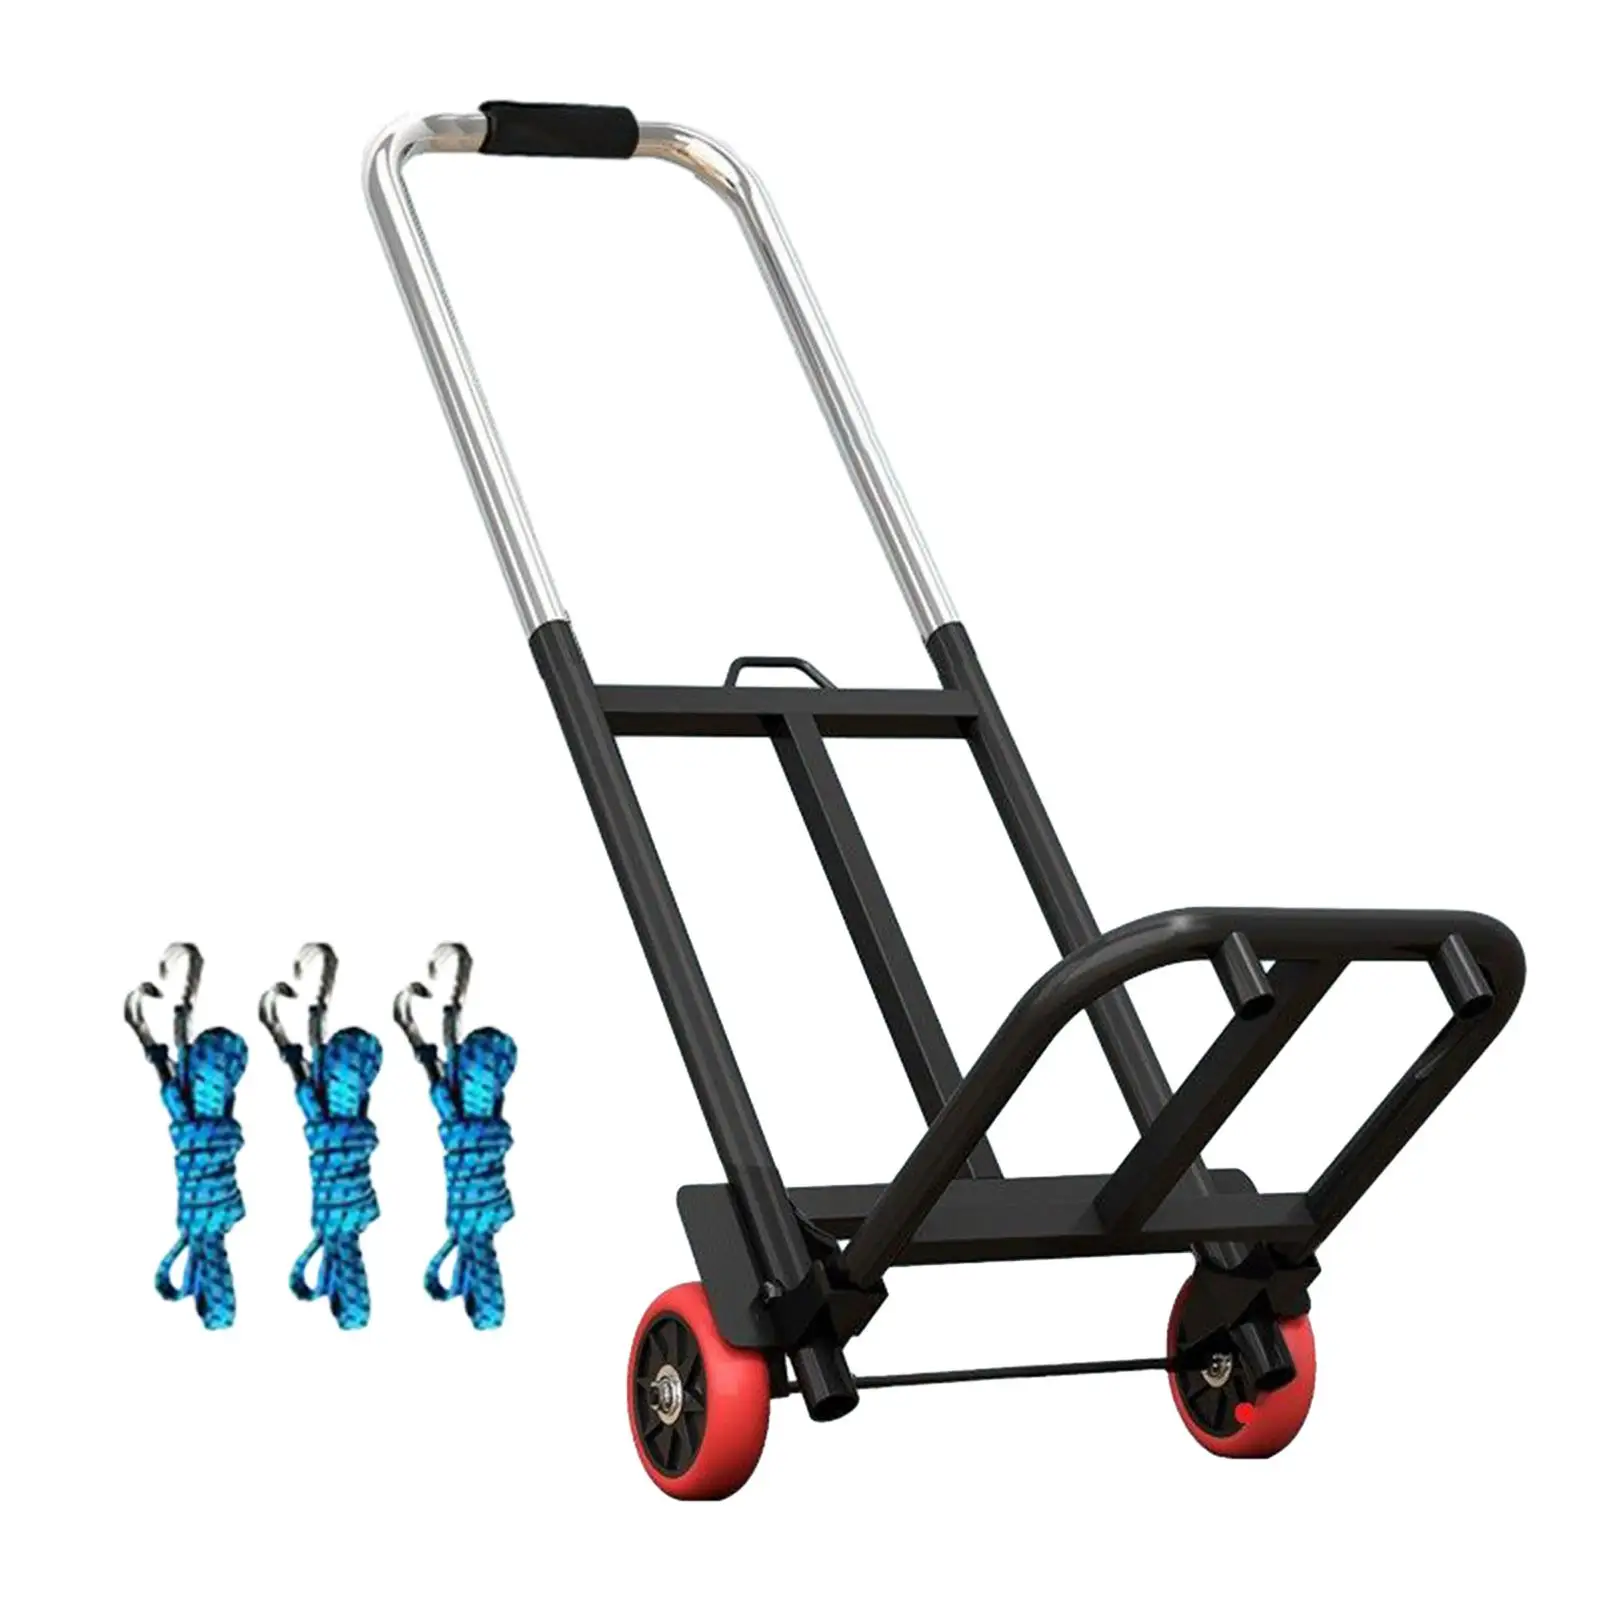 Folding Hand Truck Luggage Trolley Cart Shopping Cart with 2 Wheels Adjustable Handle for Daily Use Convenient Smooth Rolling